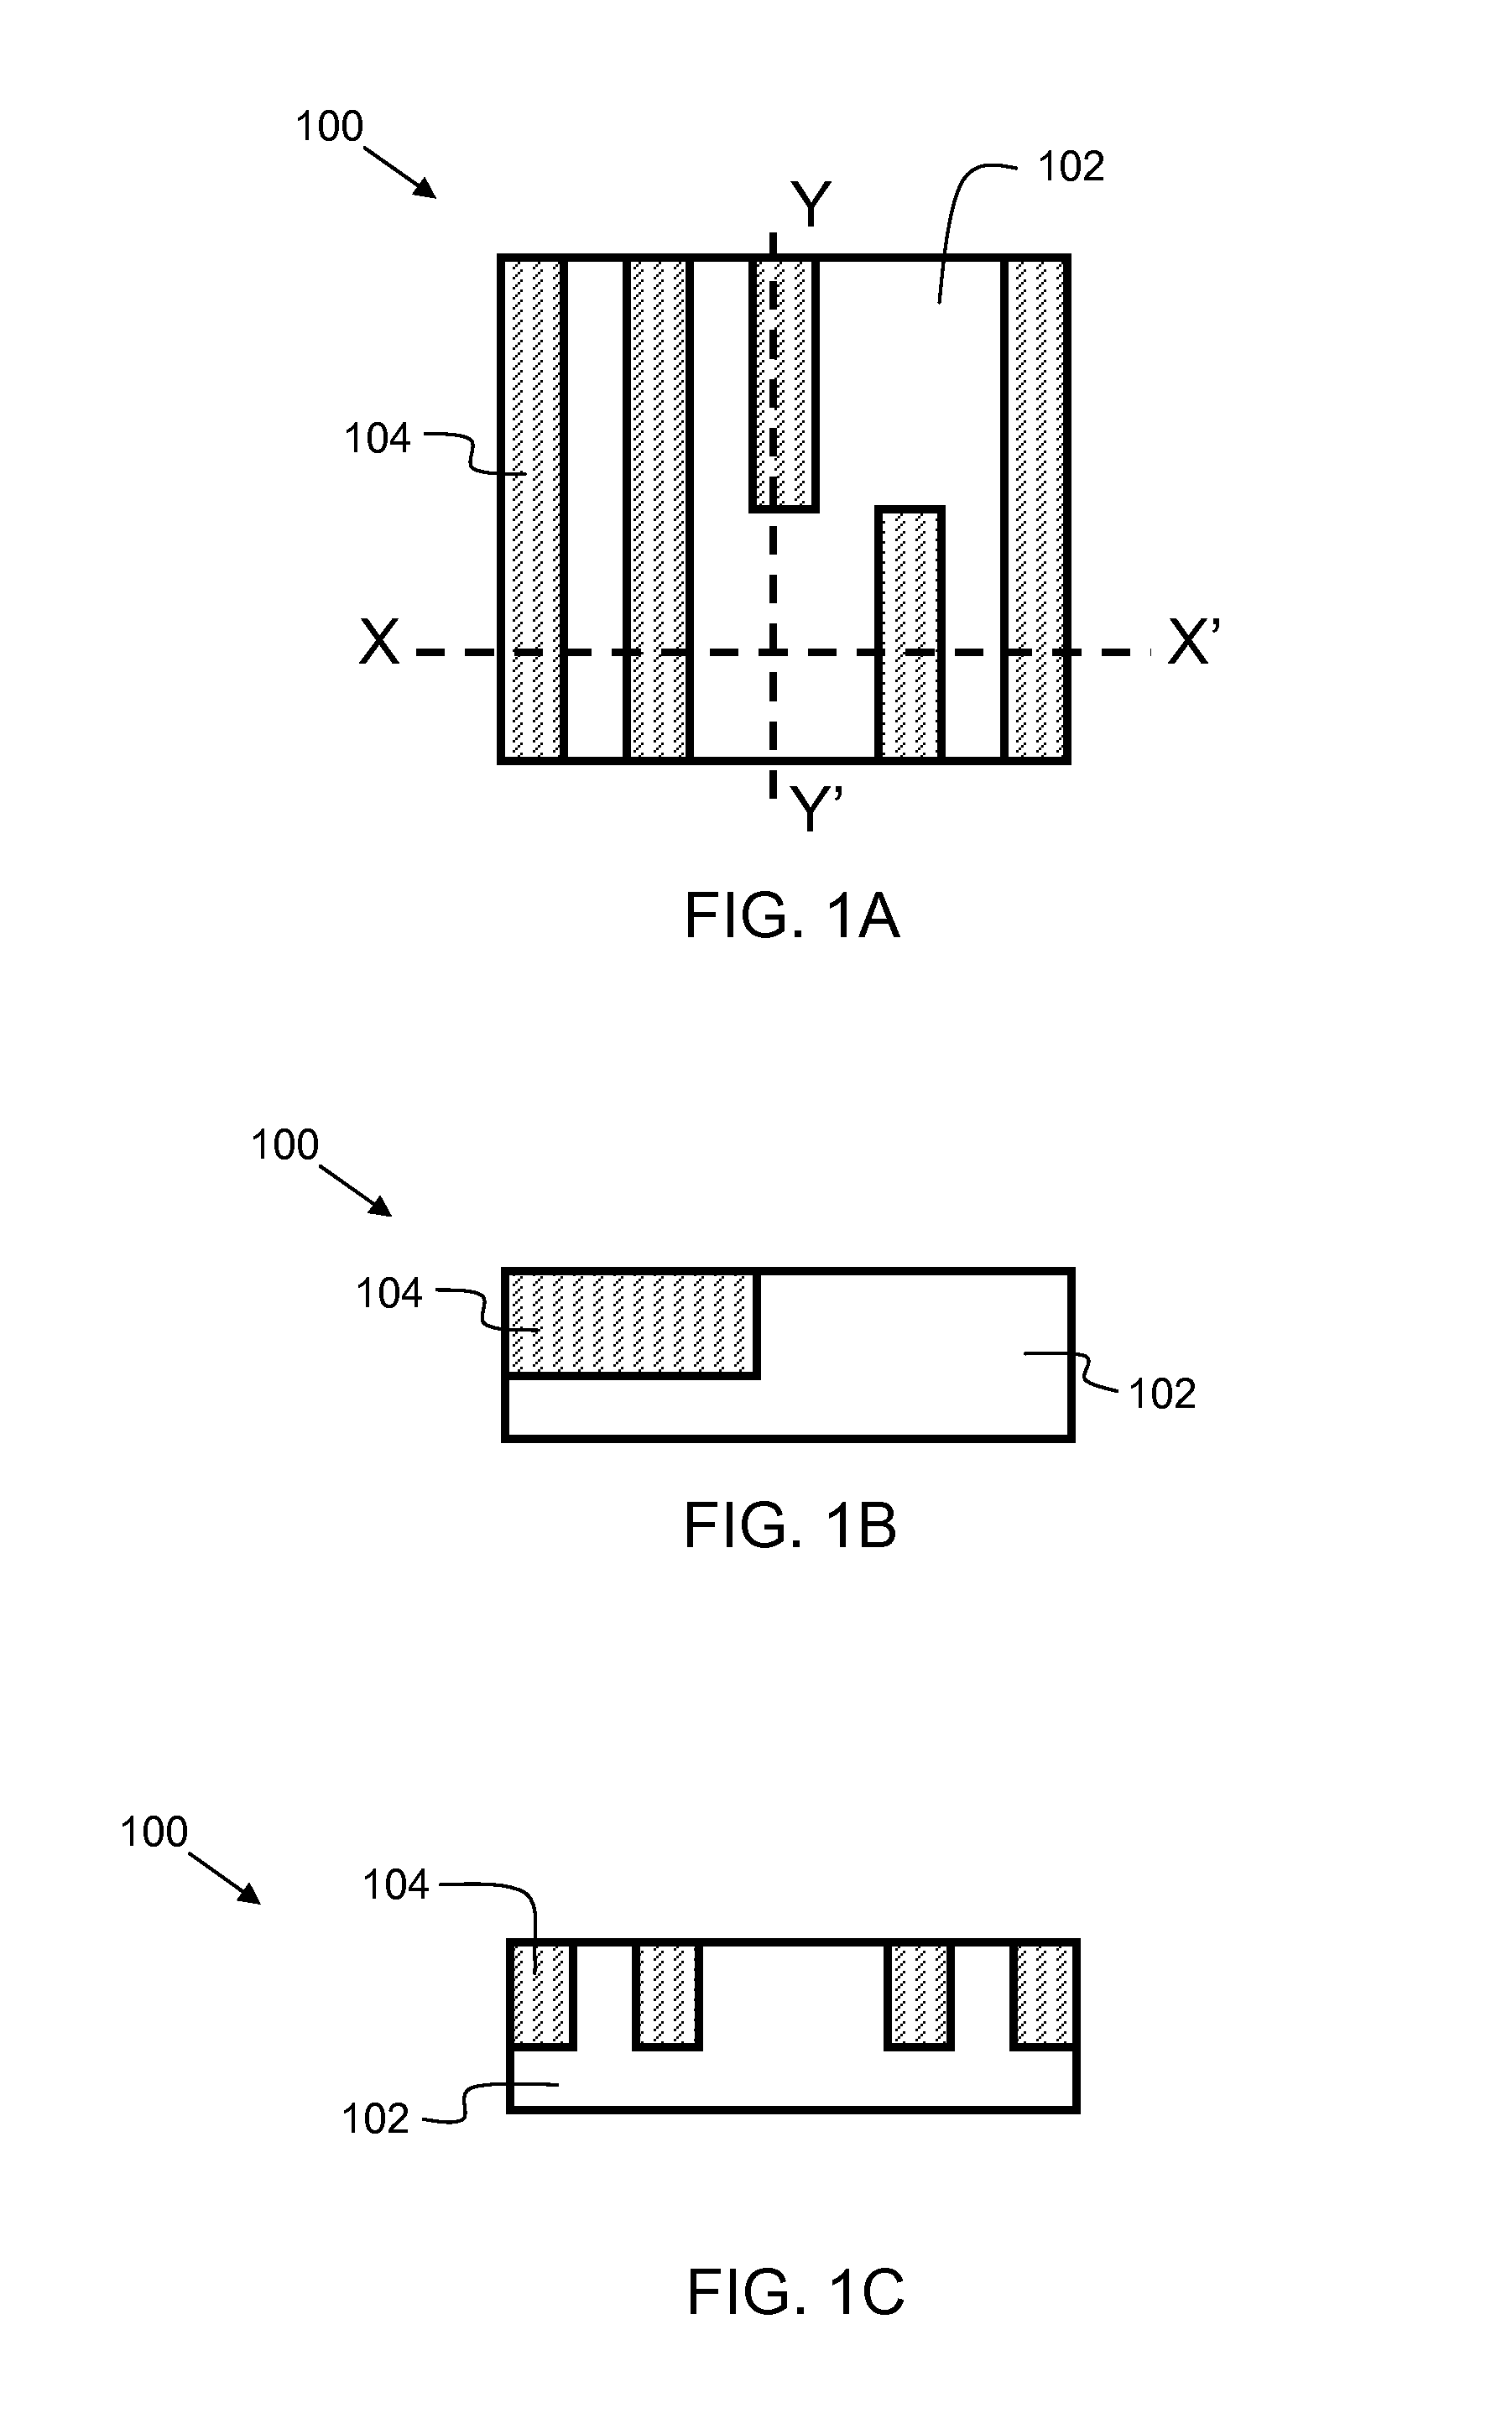 Random local metal cap layer formation for improved integrated circuit reliability